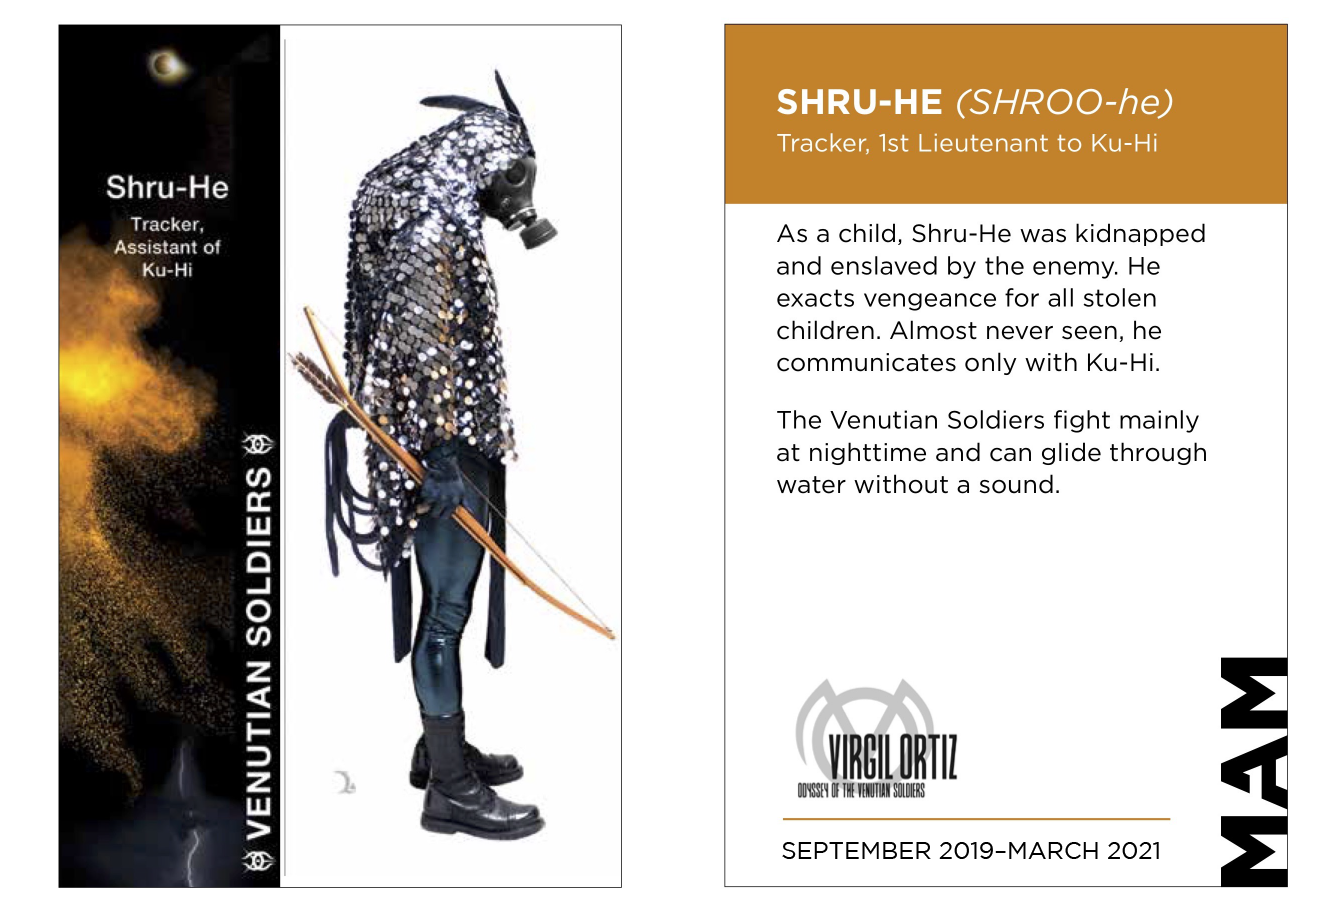 an information card about one of Virgil Ortiz's Venutian Soldiers.